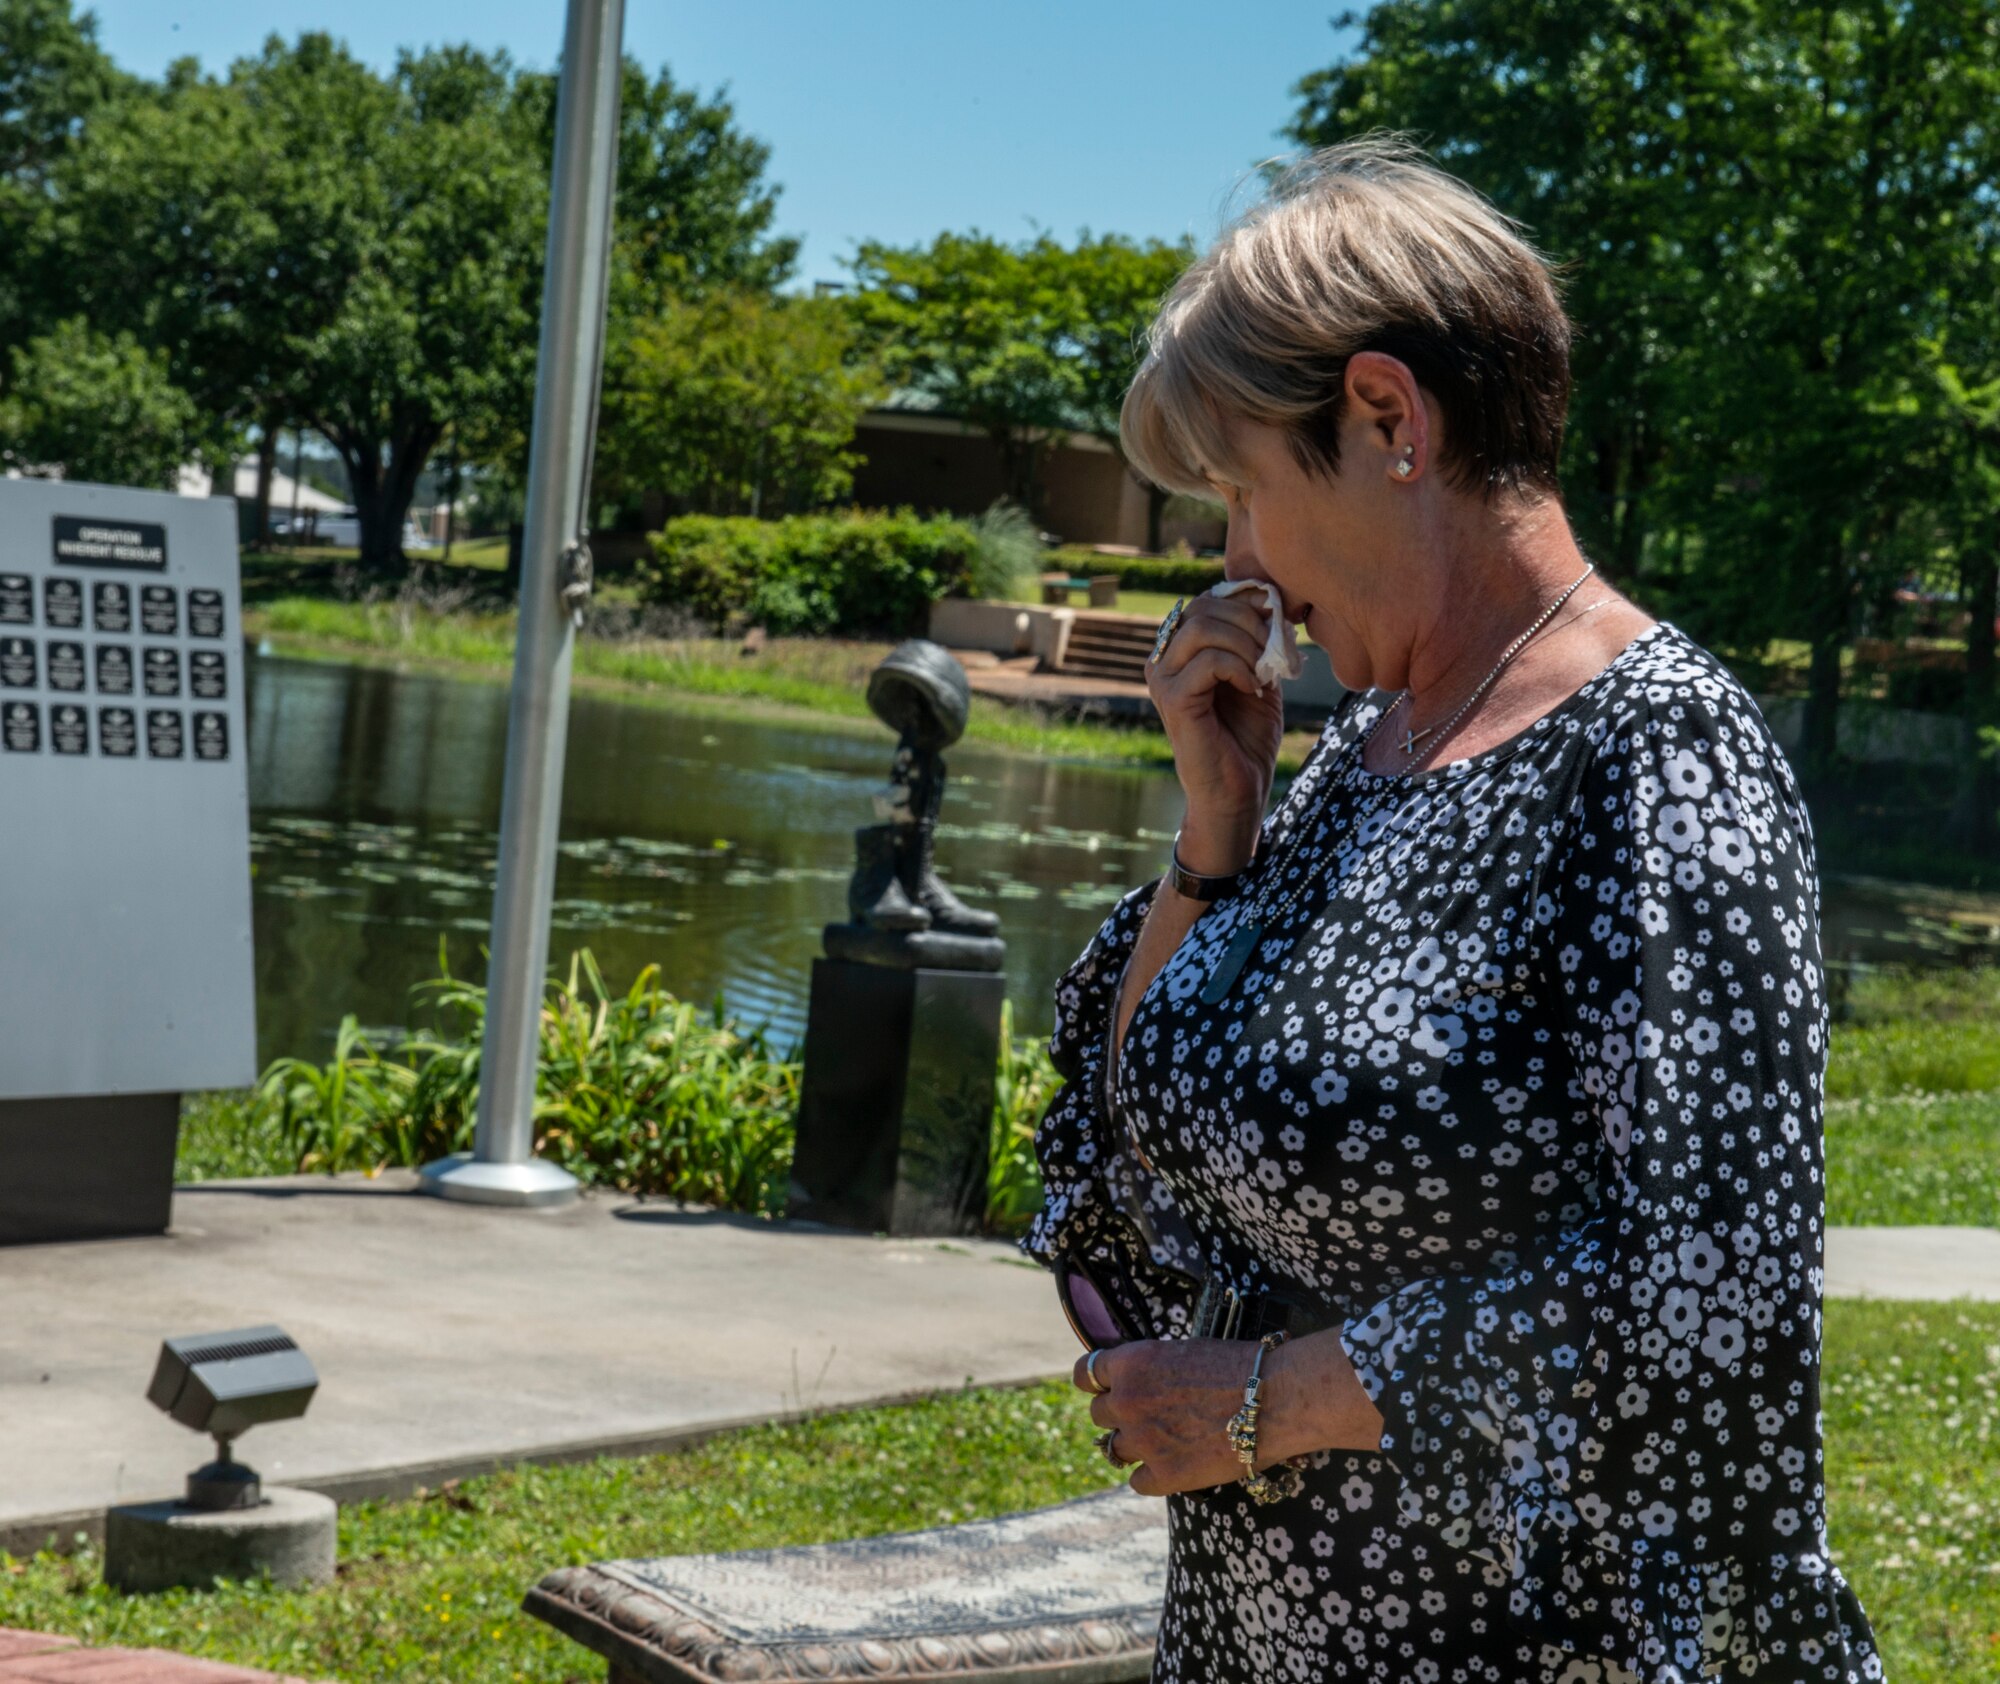 Lynda Bubacz, an American Gold Star Mother tears up as she sees her son’s name on a memorial plaque at Shaw Air Force Base, S.C., April 23, 2019.